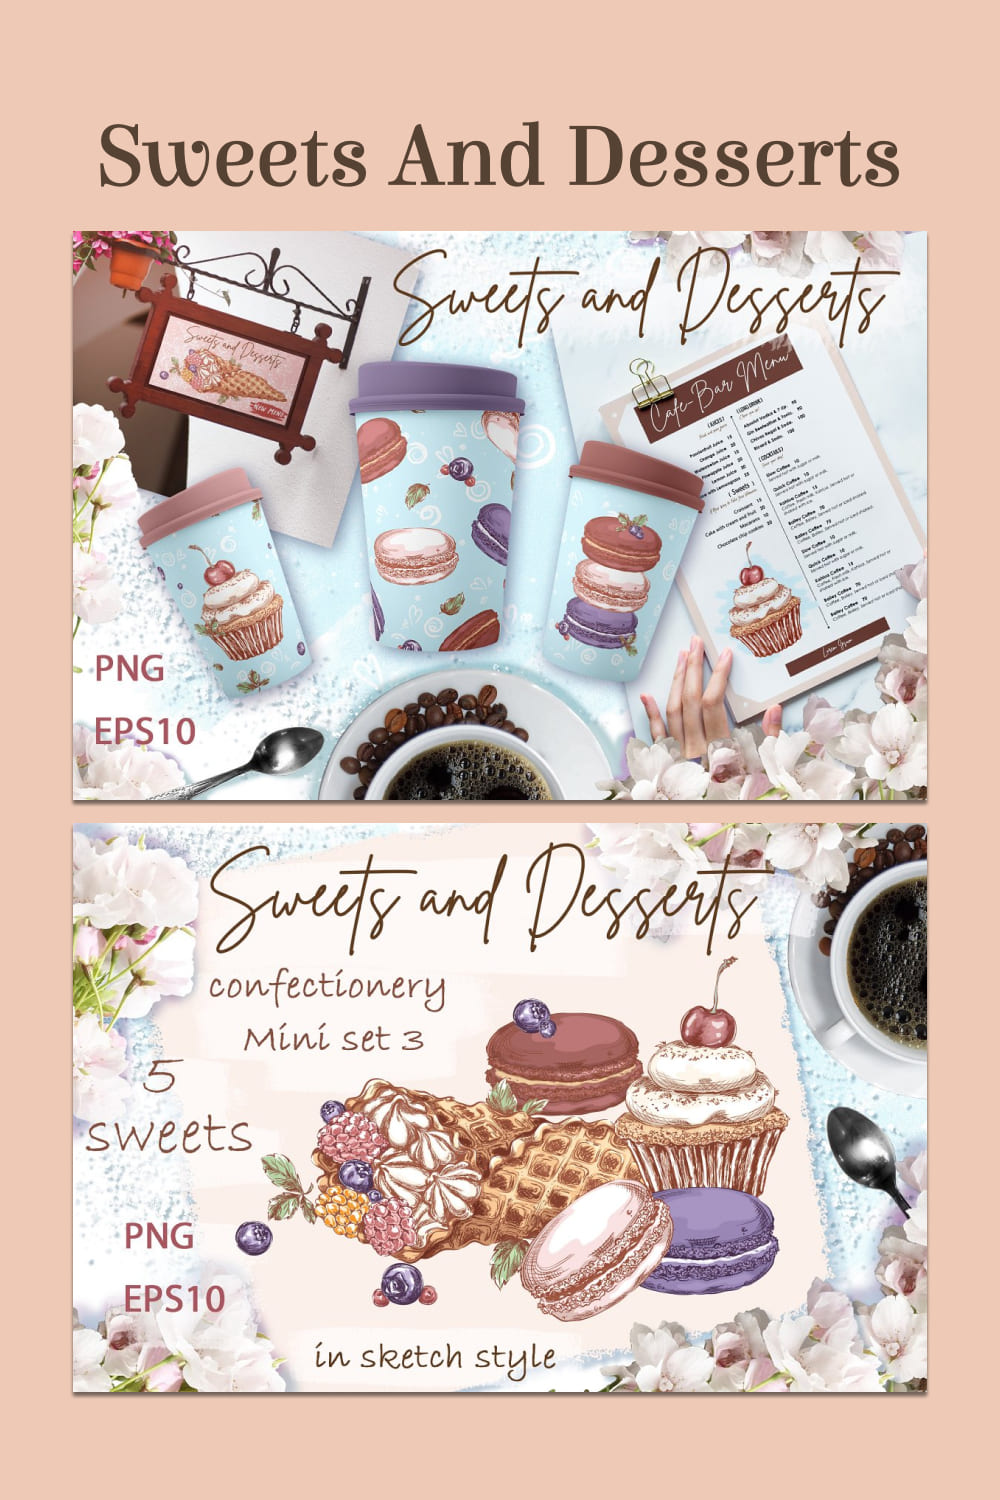 Sweets and desserts. mini set - pinterest image preview.